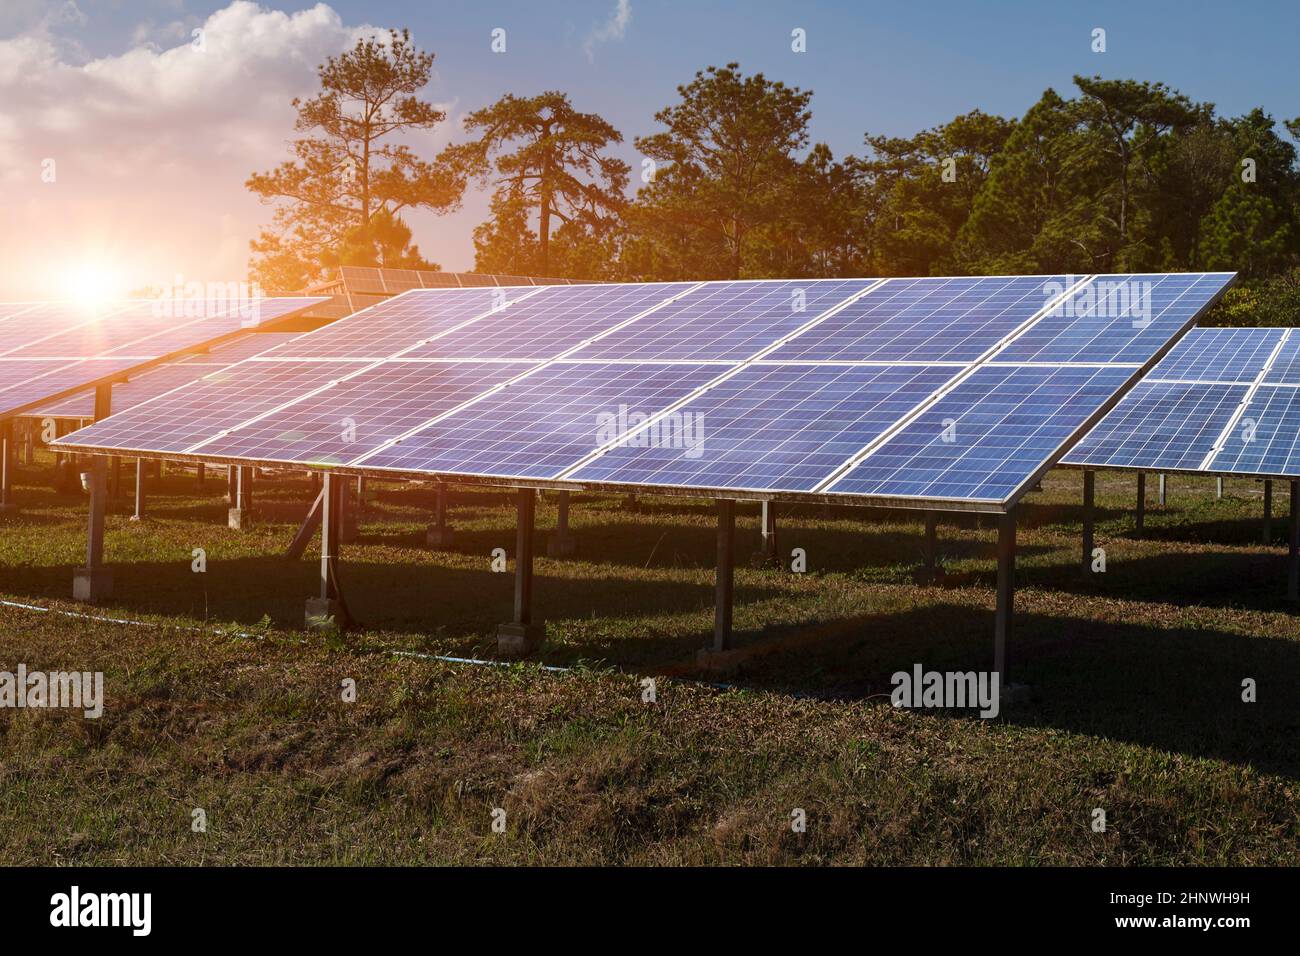 Solar module panels against sunset sky background. Environmental energy resources concept. Stock Photo